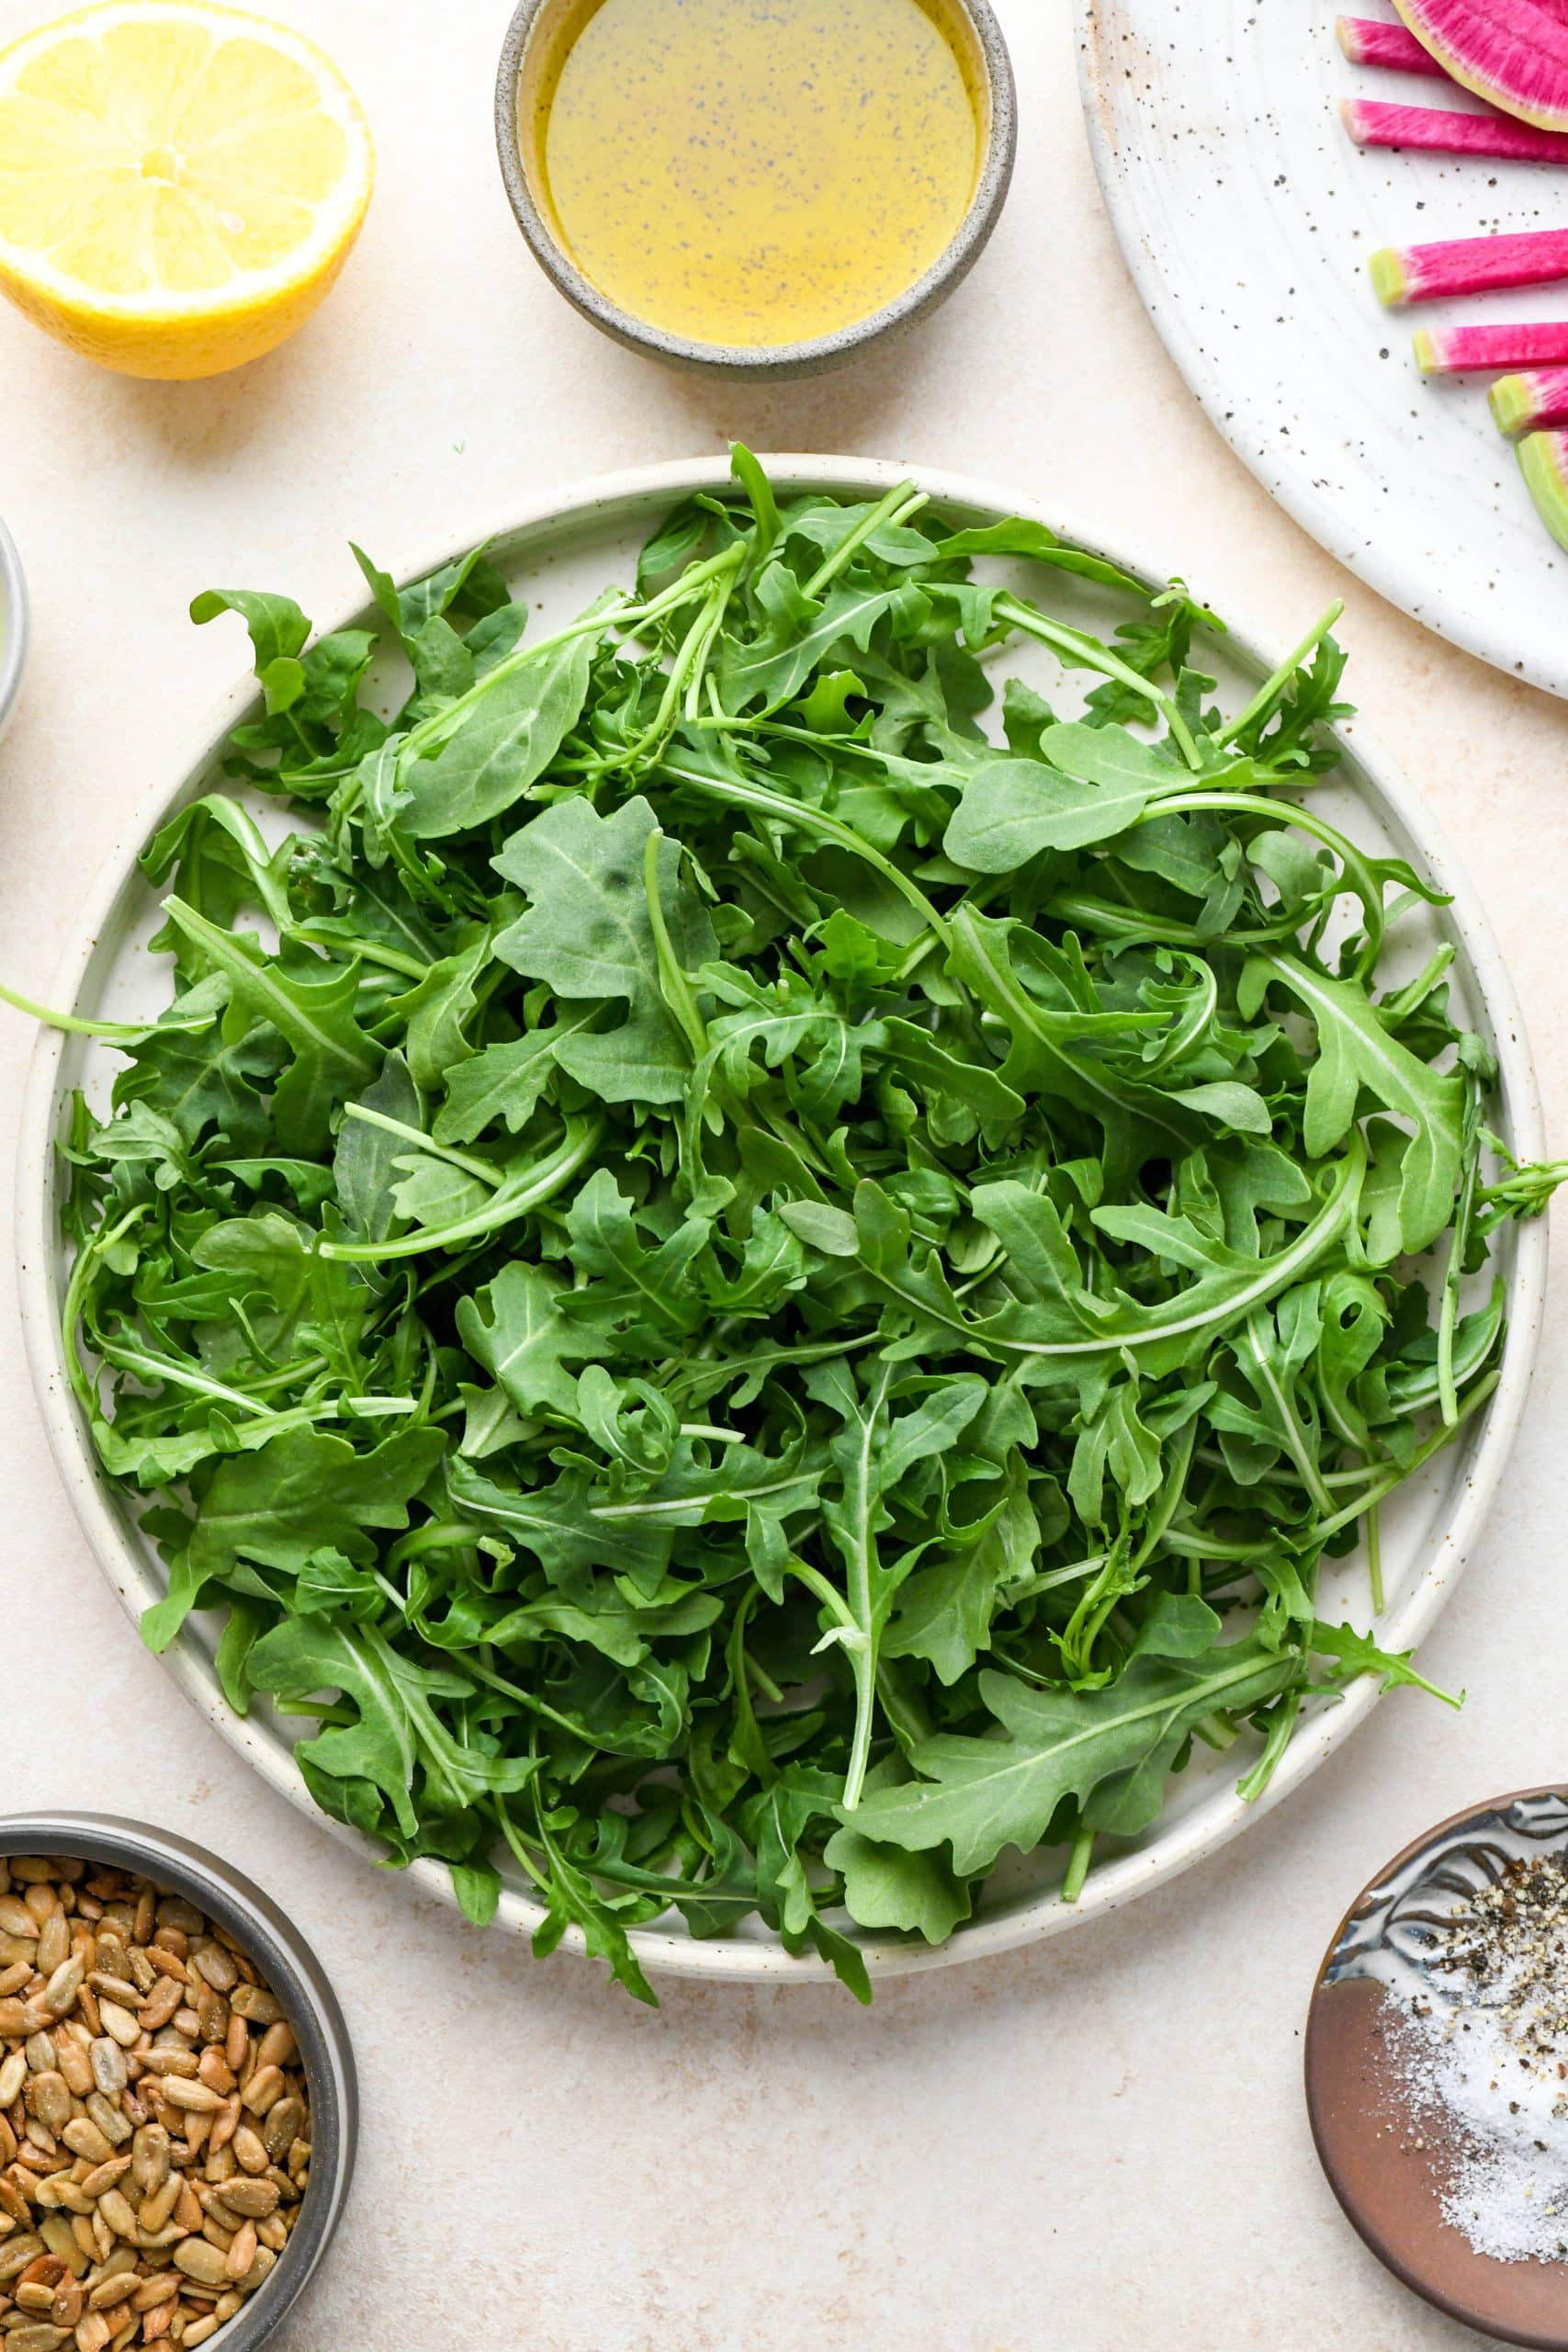 Ingredients for Simple Arugula Salad: Arugula, sunflower seeds, radishes, and dressing ingredients on a light cream colored background.